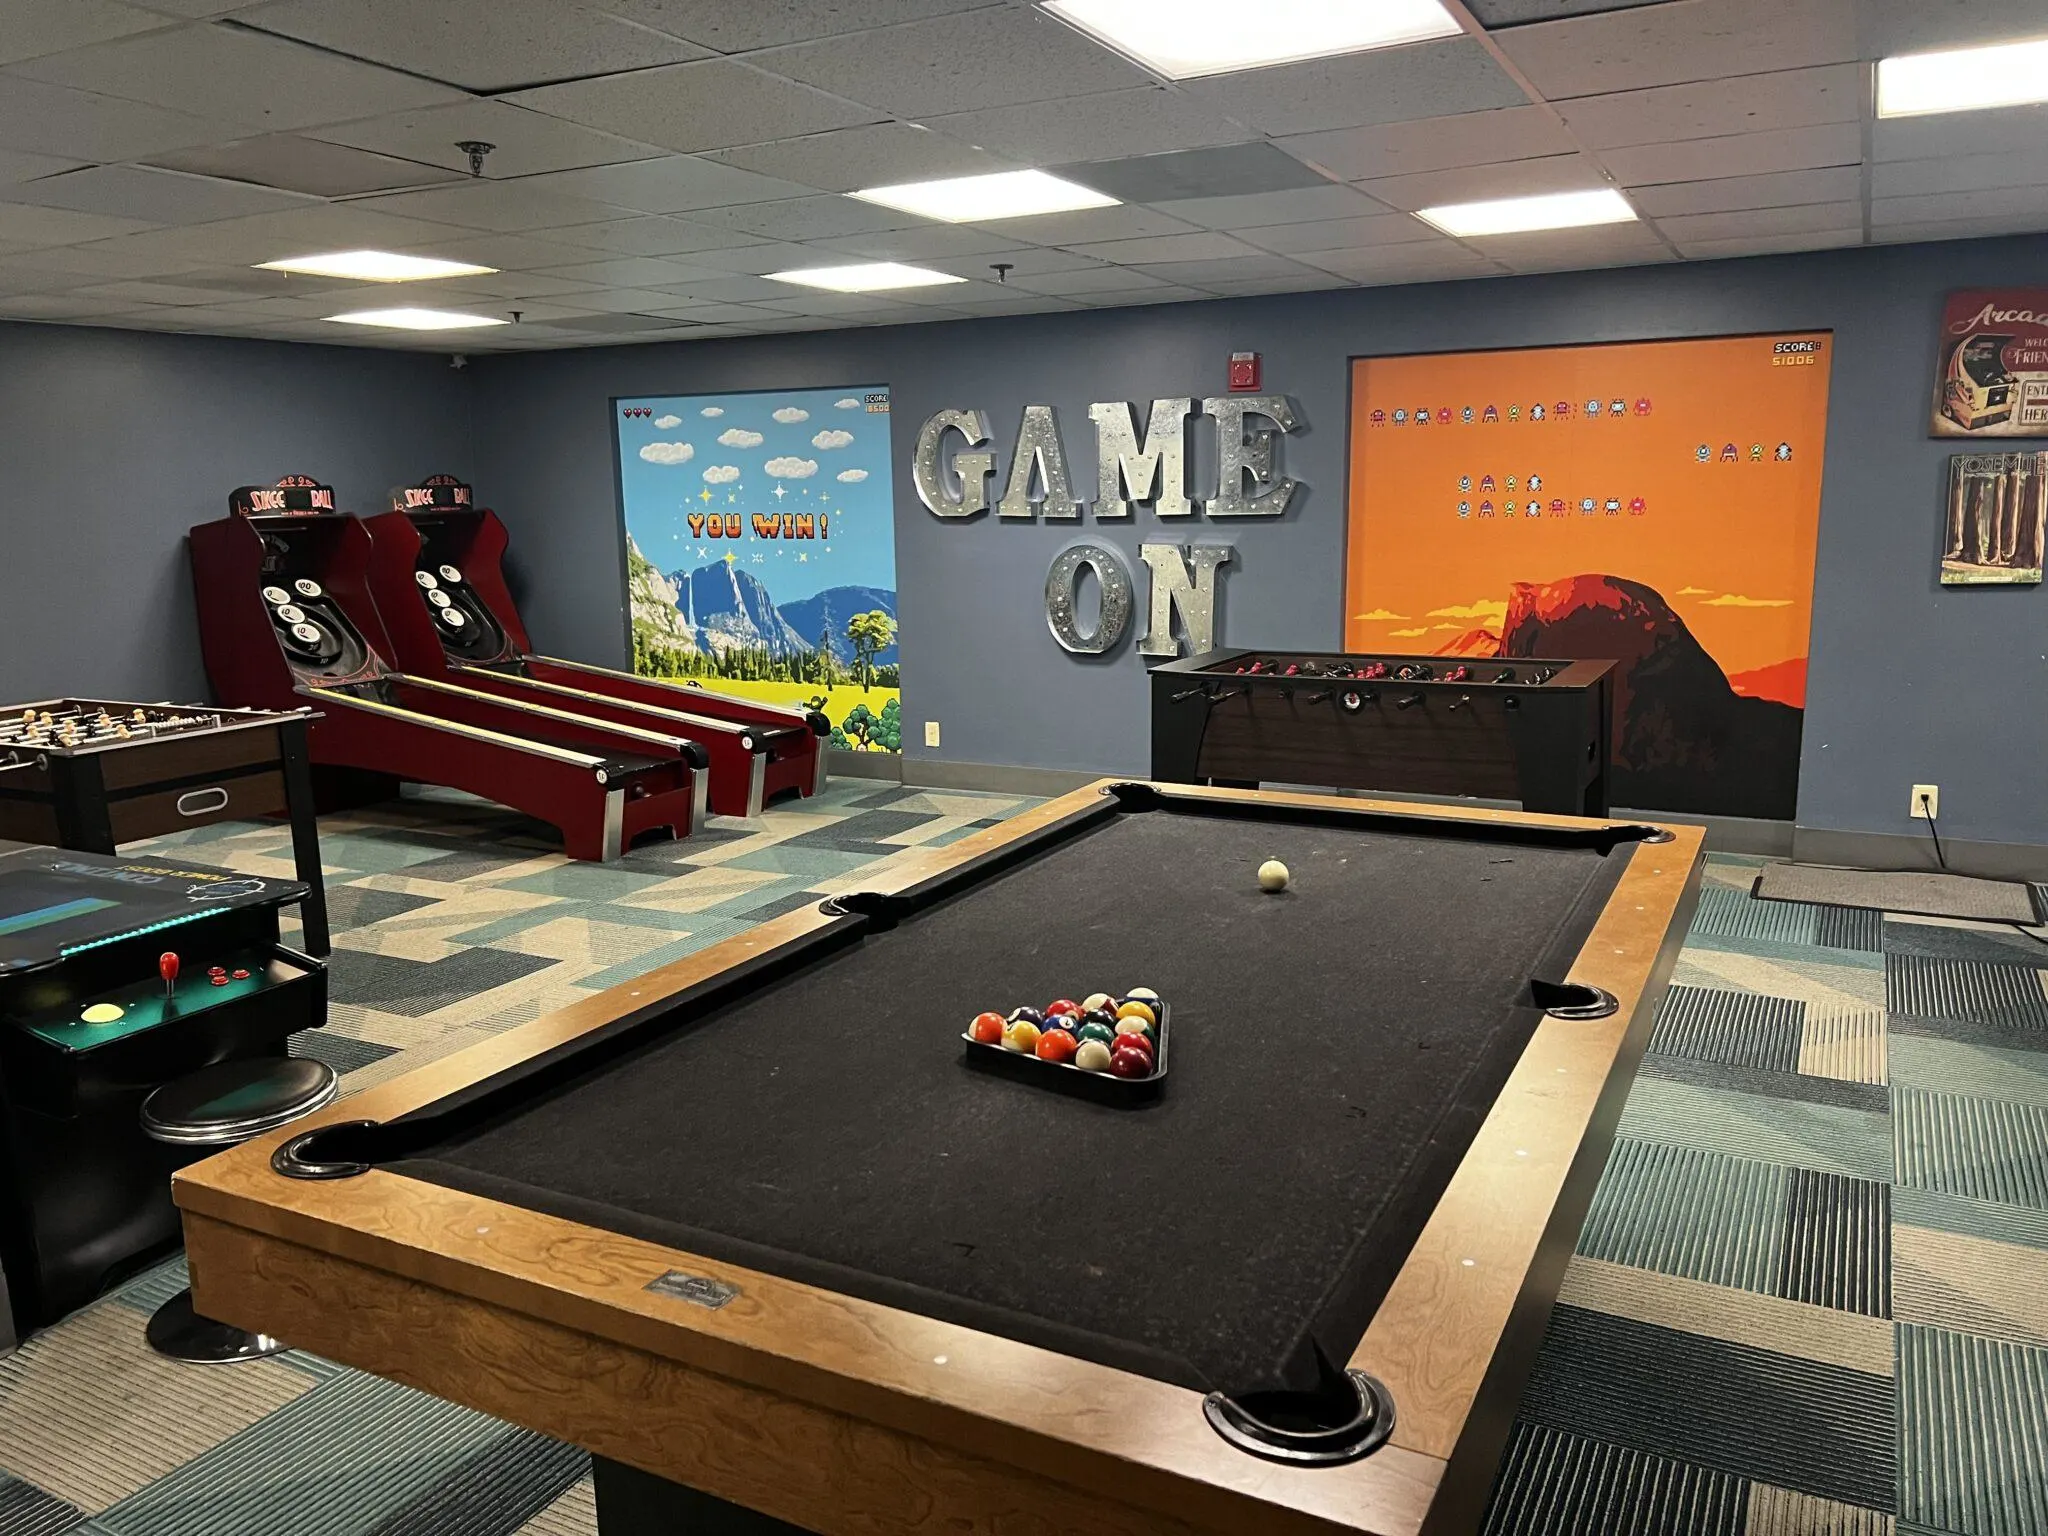 Game room with pool table in the middle